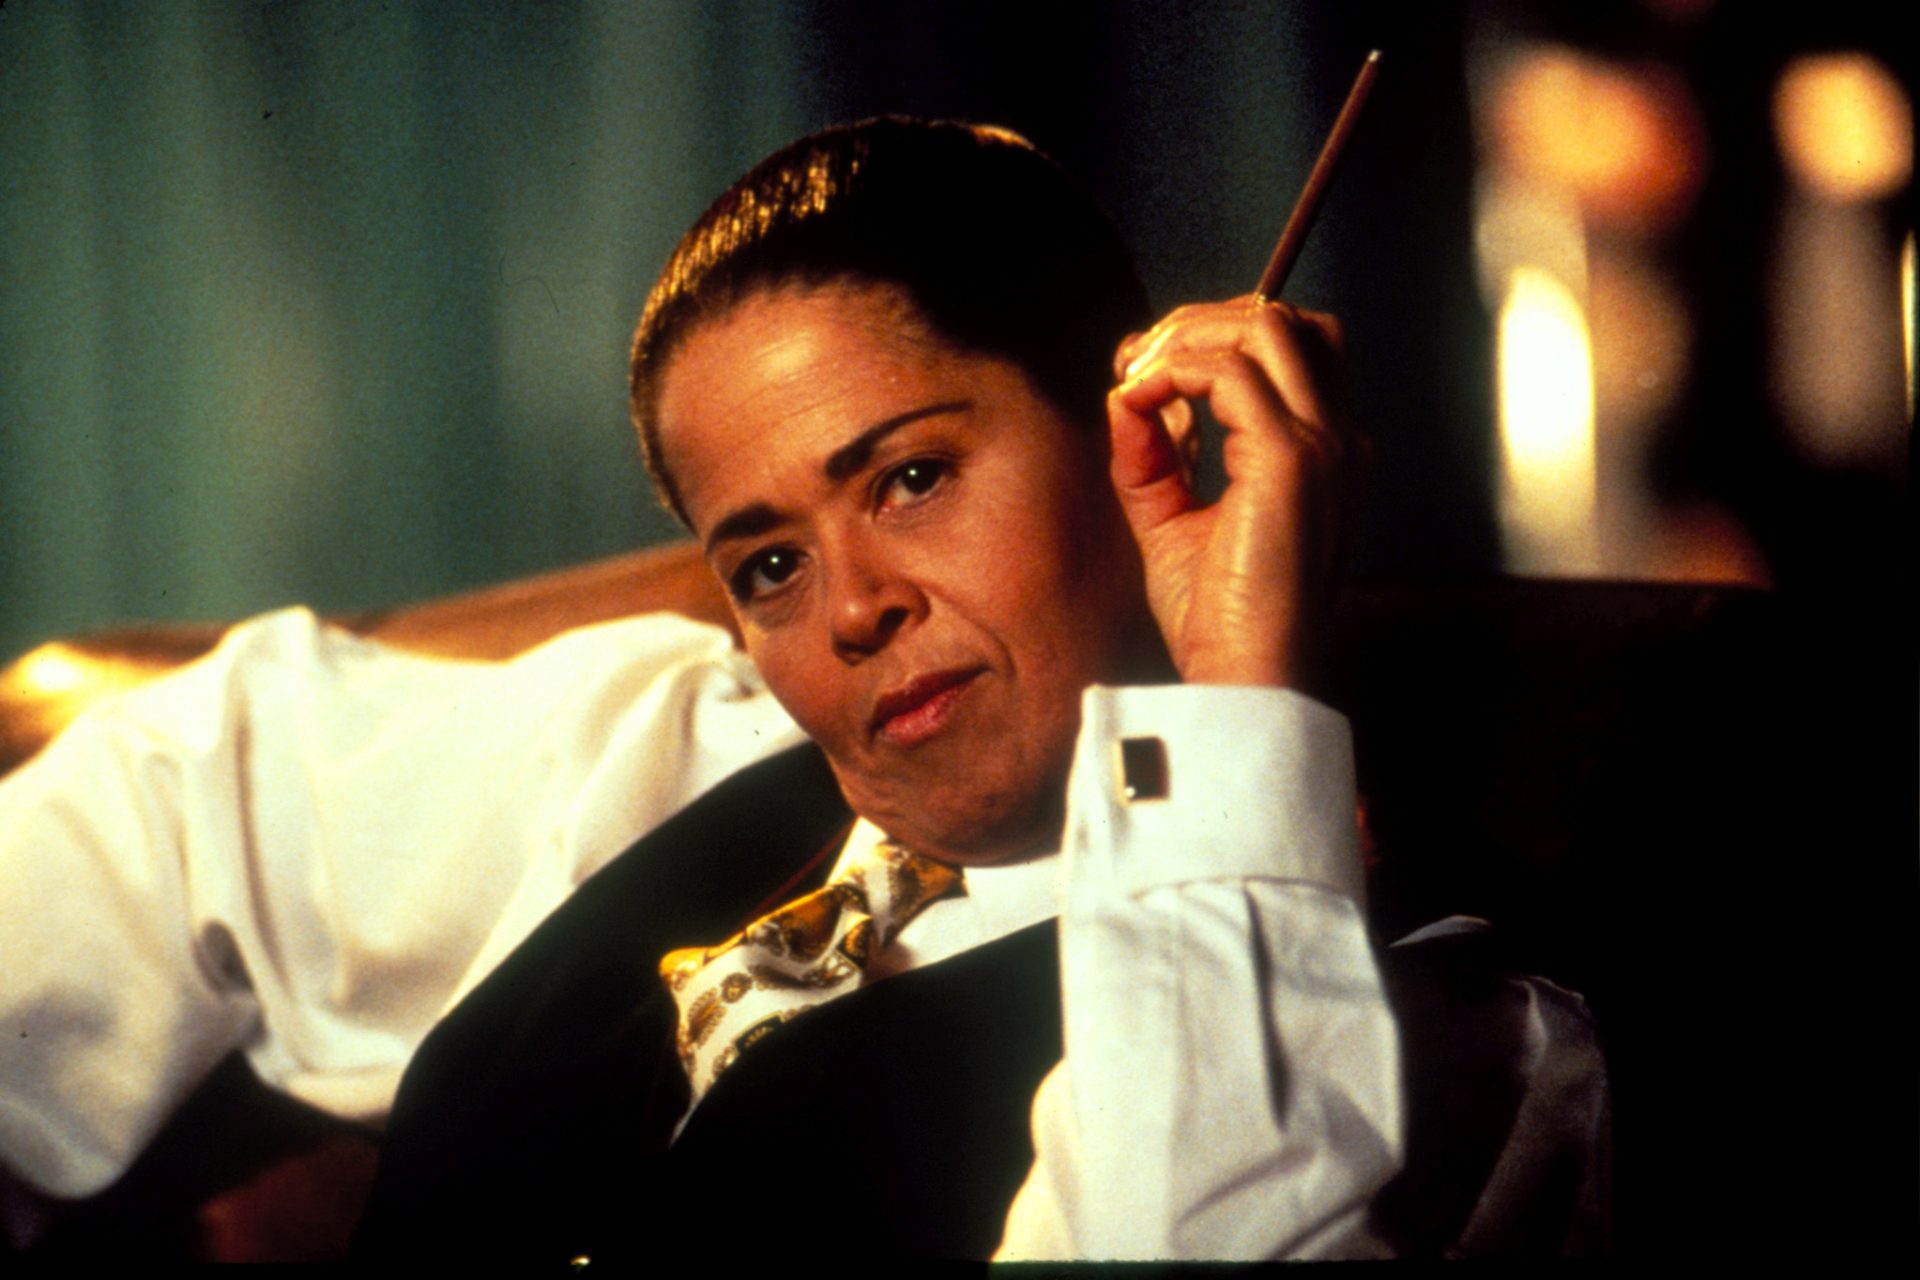 Anna Deavere Smith as Cornel West in “Twilight: Los Angeles.”